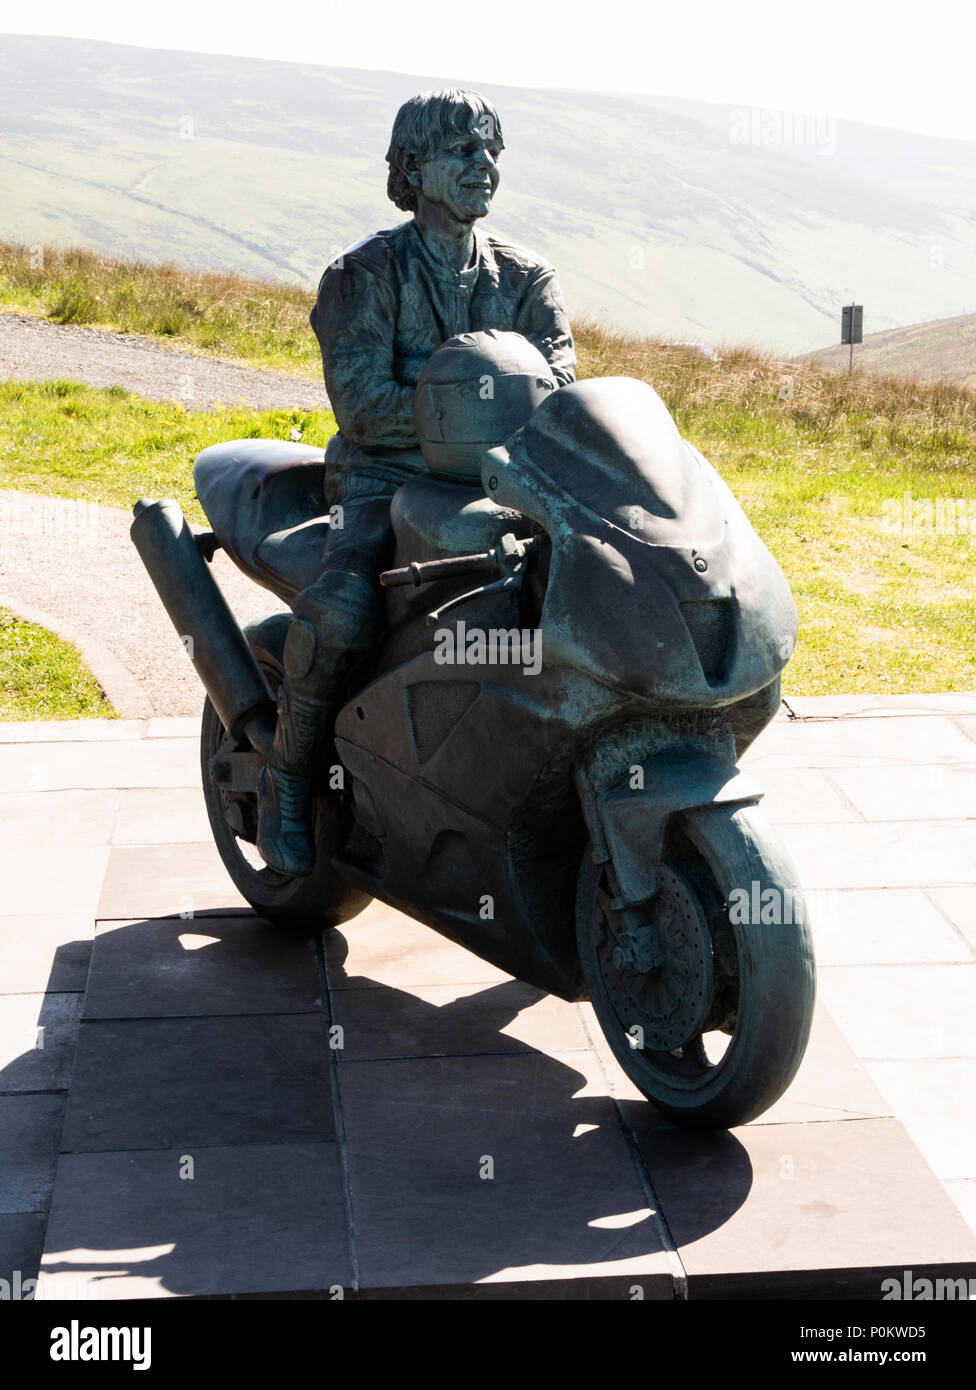 Joey Dunlop statue memorial, Snaefell, The Bungalow, Isle of Man TT 2018. Tourist Trophy road race, mountain course Stock Photo